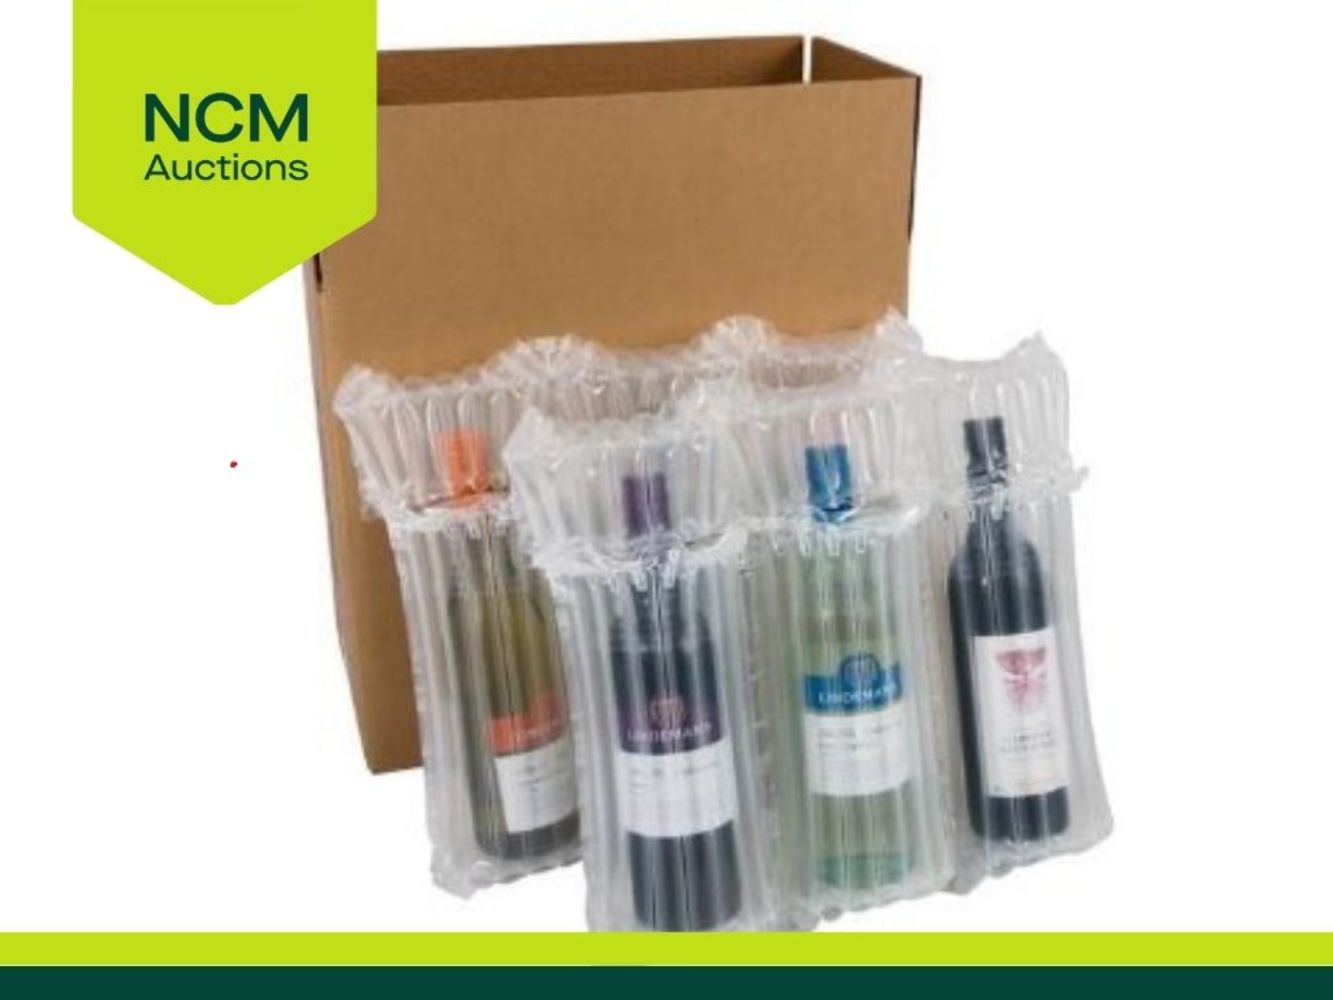 NO RESERVE - Brand New Boxed - Inflatable AirSac Packaging For Wine Bottle, Candles, Mugs & Glasses